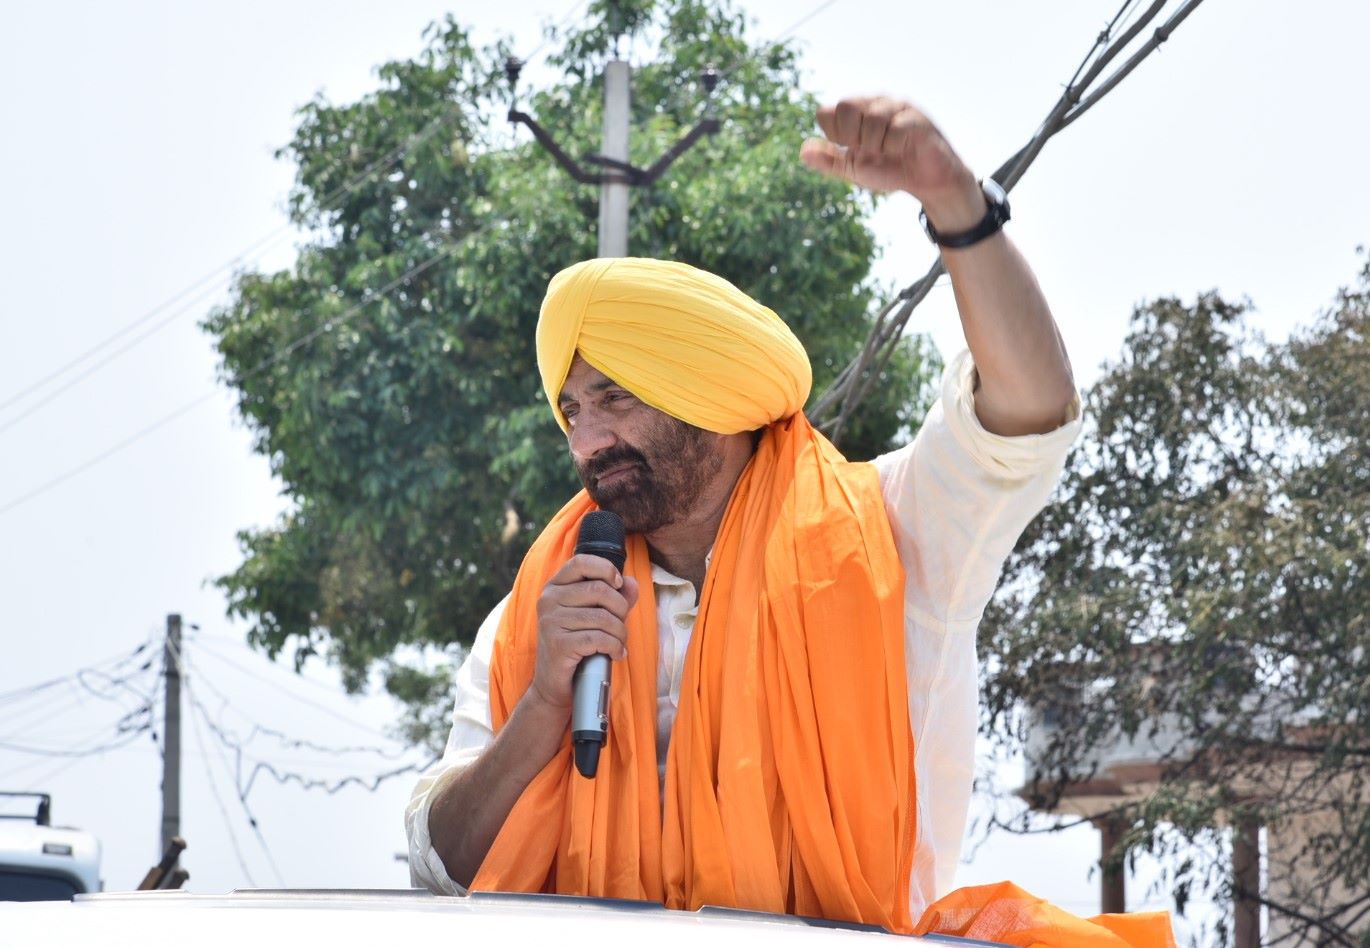 Stand with my party, will always be with farmers: Sunny Deol’s dual stand on protests